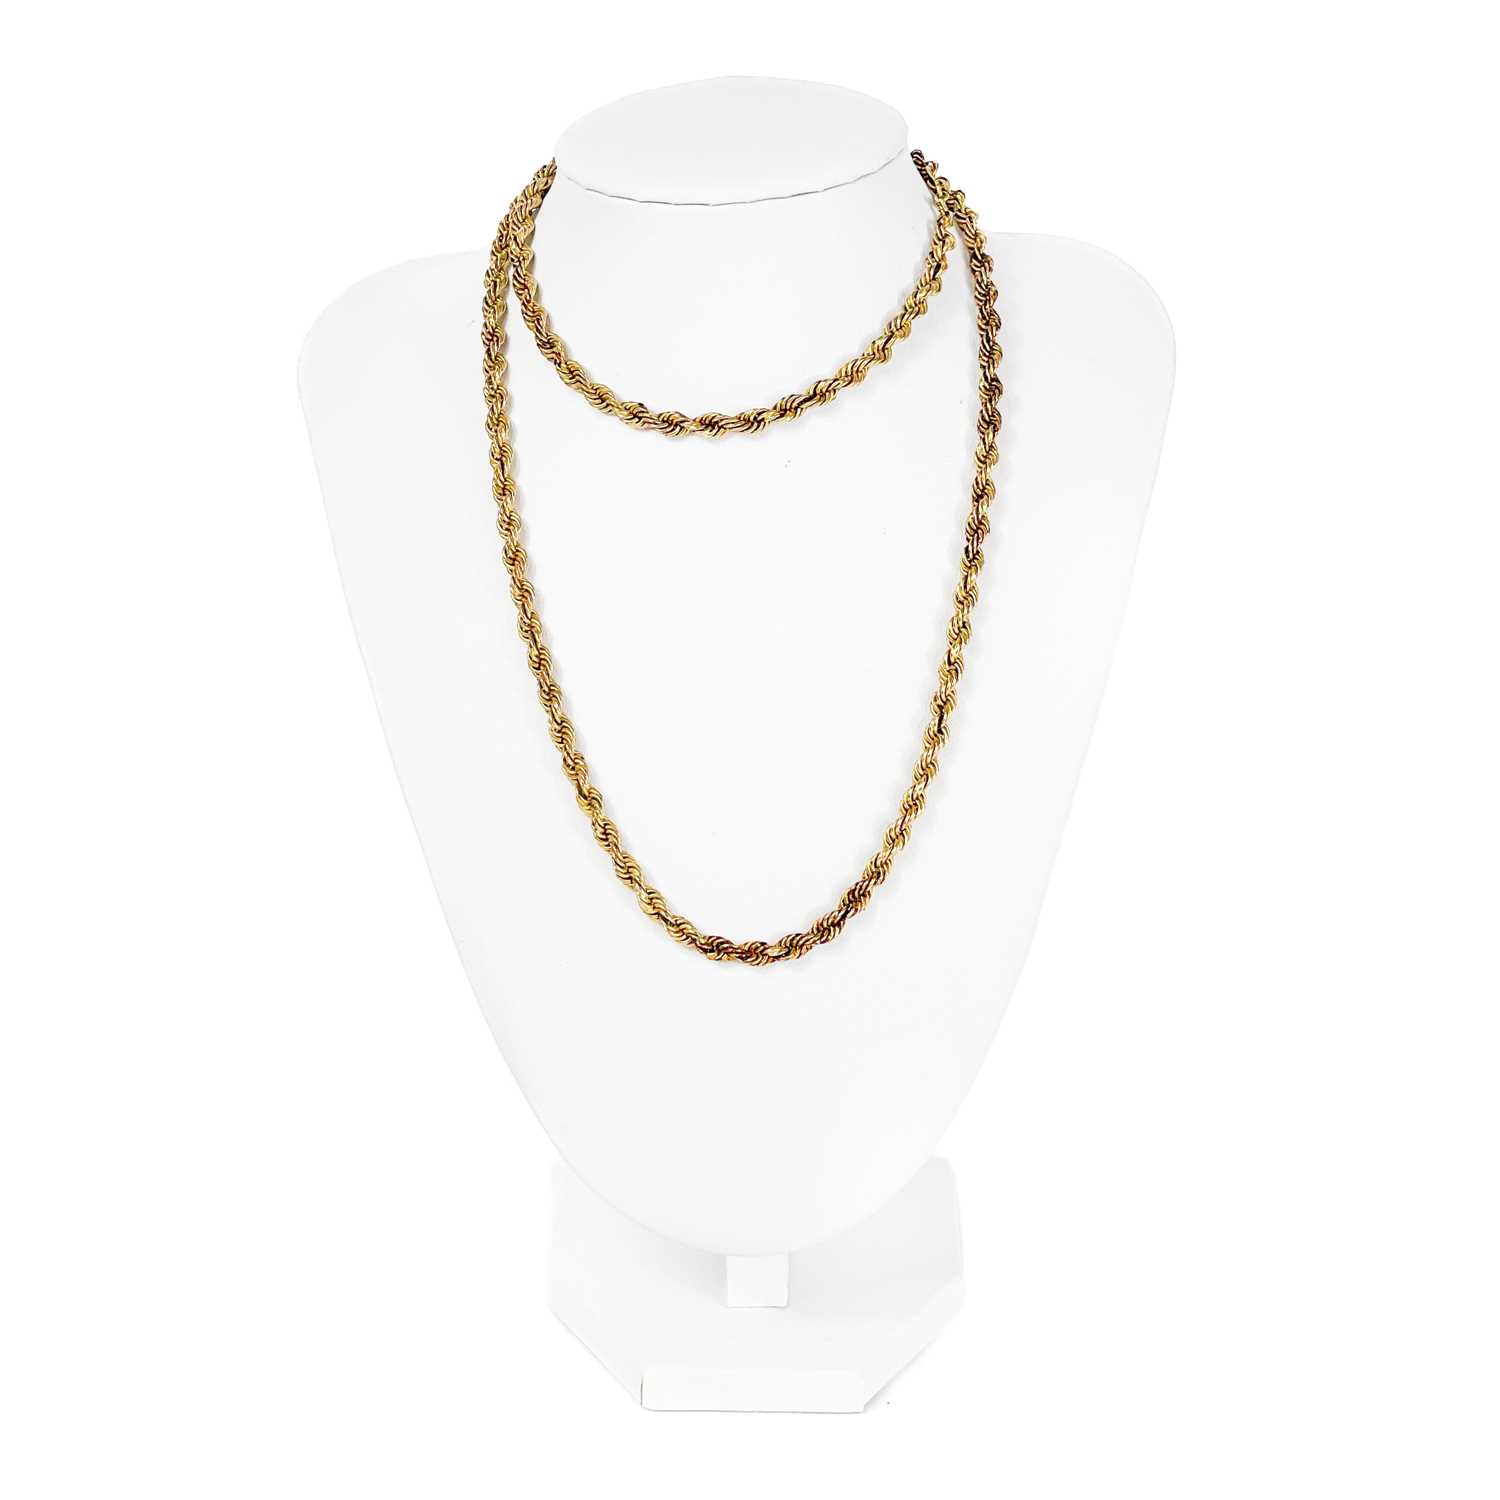 A 9ct gold rope twist long necklace. - Image 2 of 3